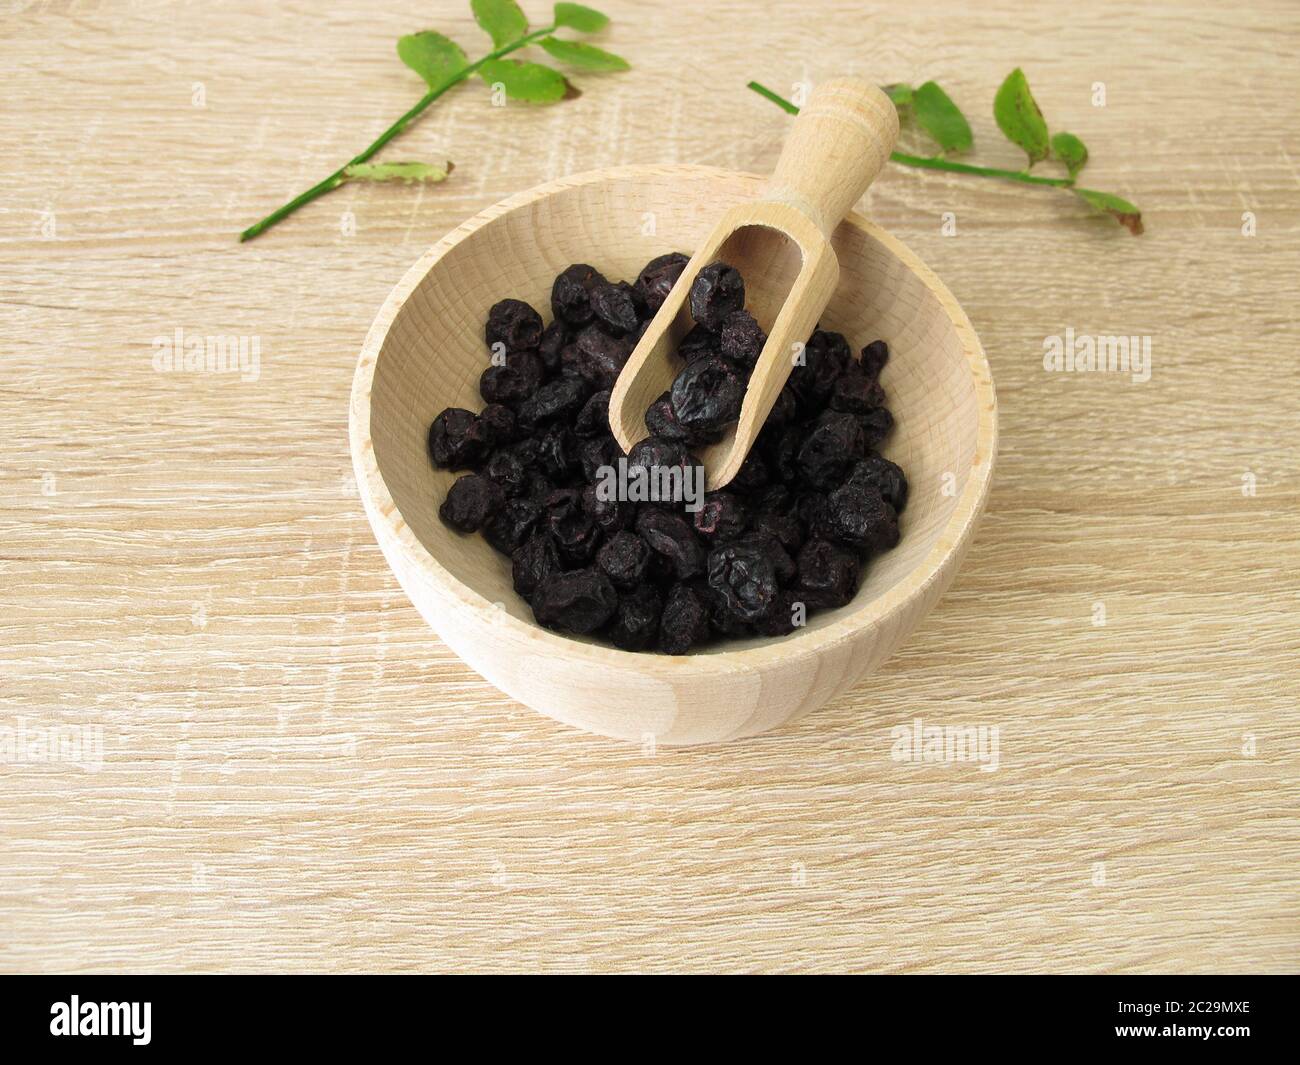 Dried blueberries in a wooden bowl Stock Photo